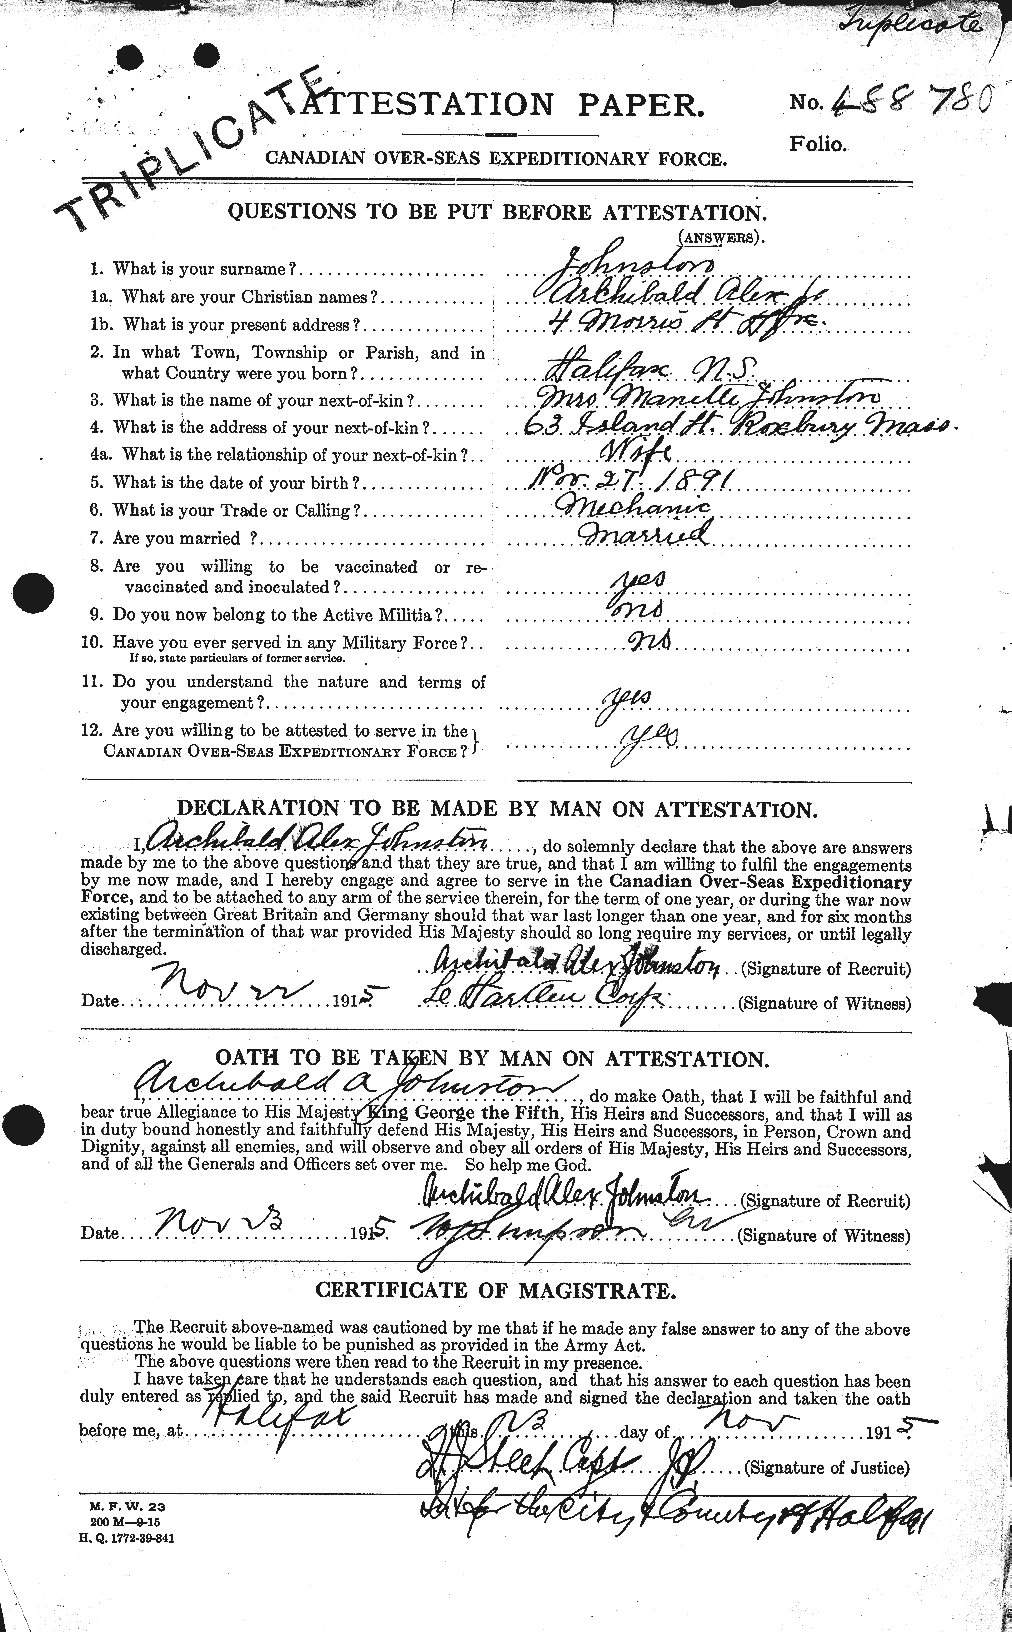 Personnel Records of the First World War - CEF 421029a